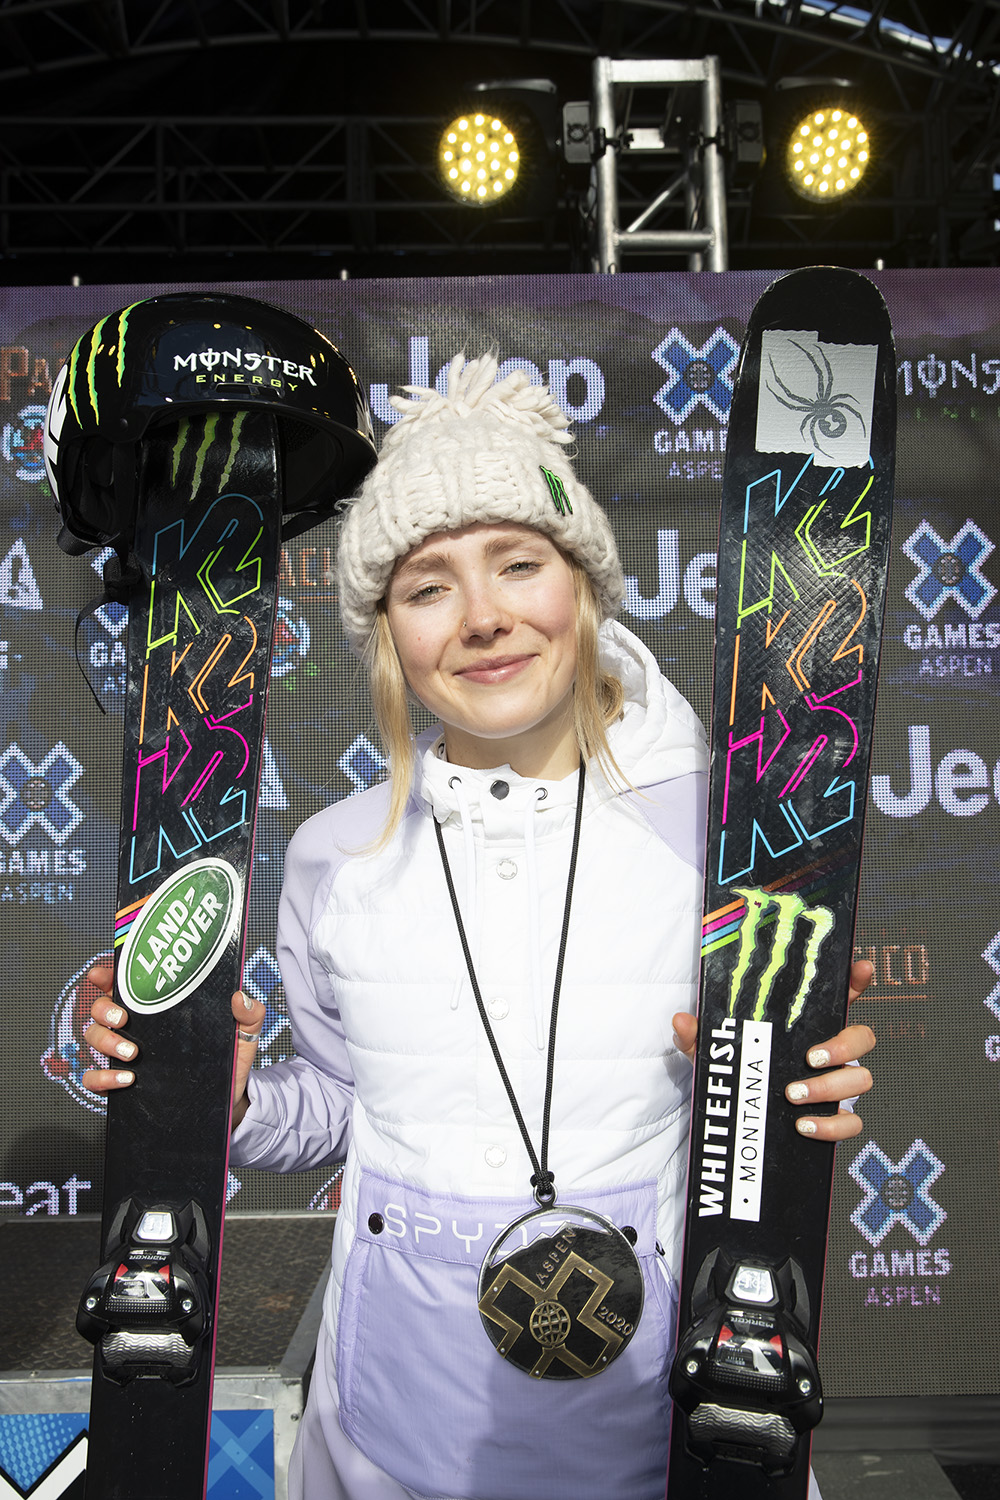 Monster Energy's Maggie Voisin Will Compete in Women's Ski Big Air and Women's Ski Slopestyle at X Games Norway 2020